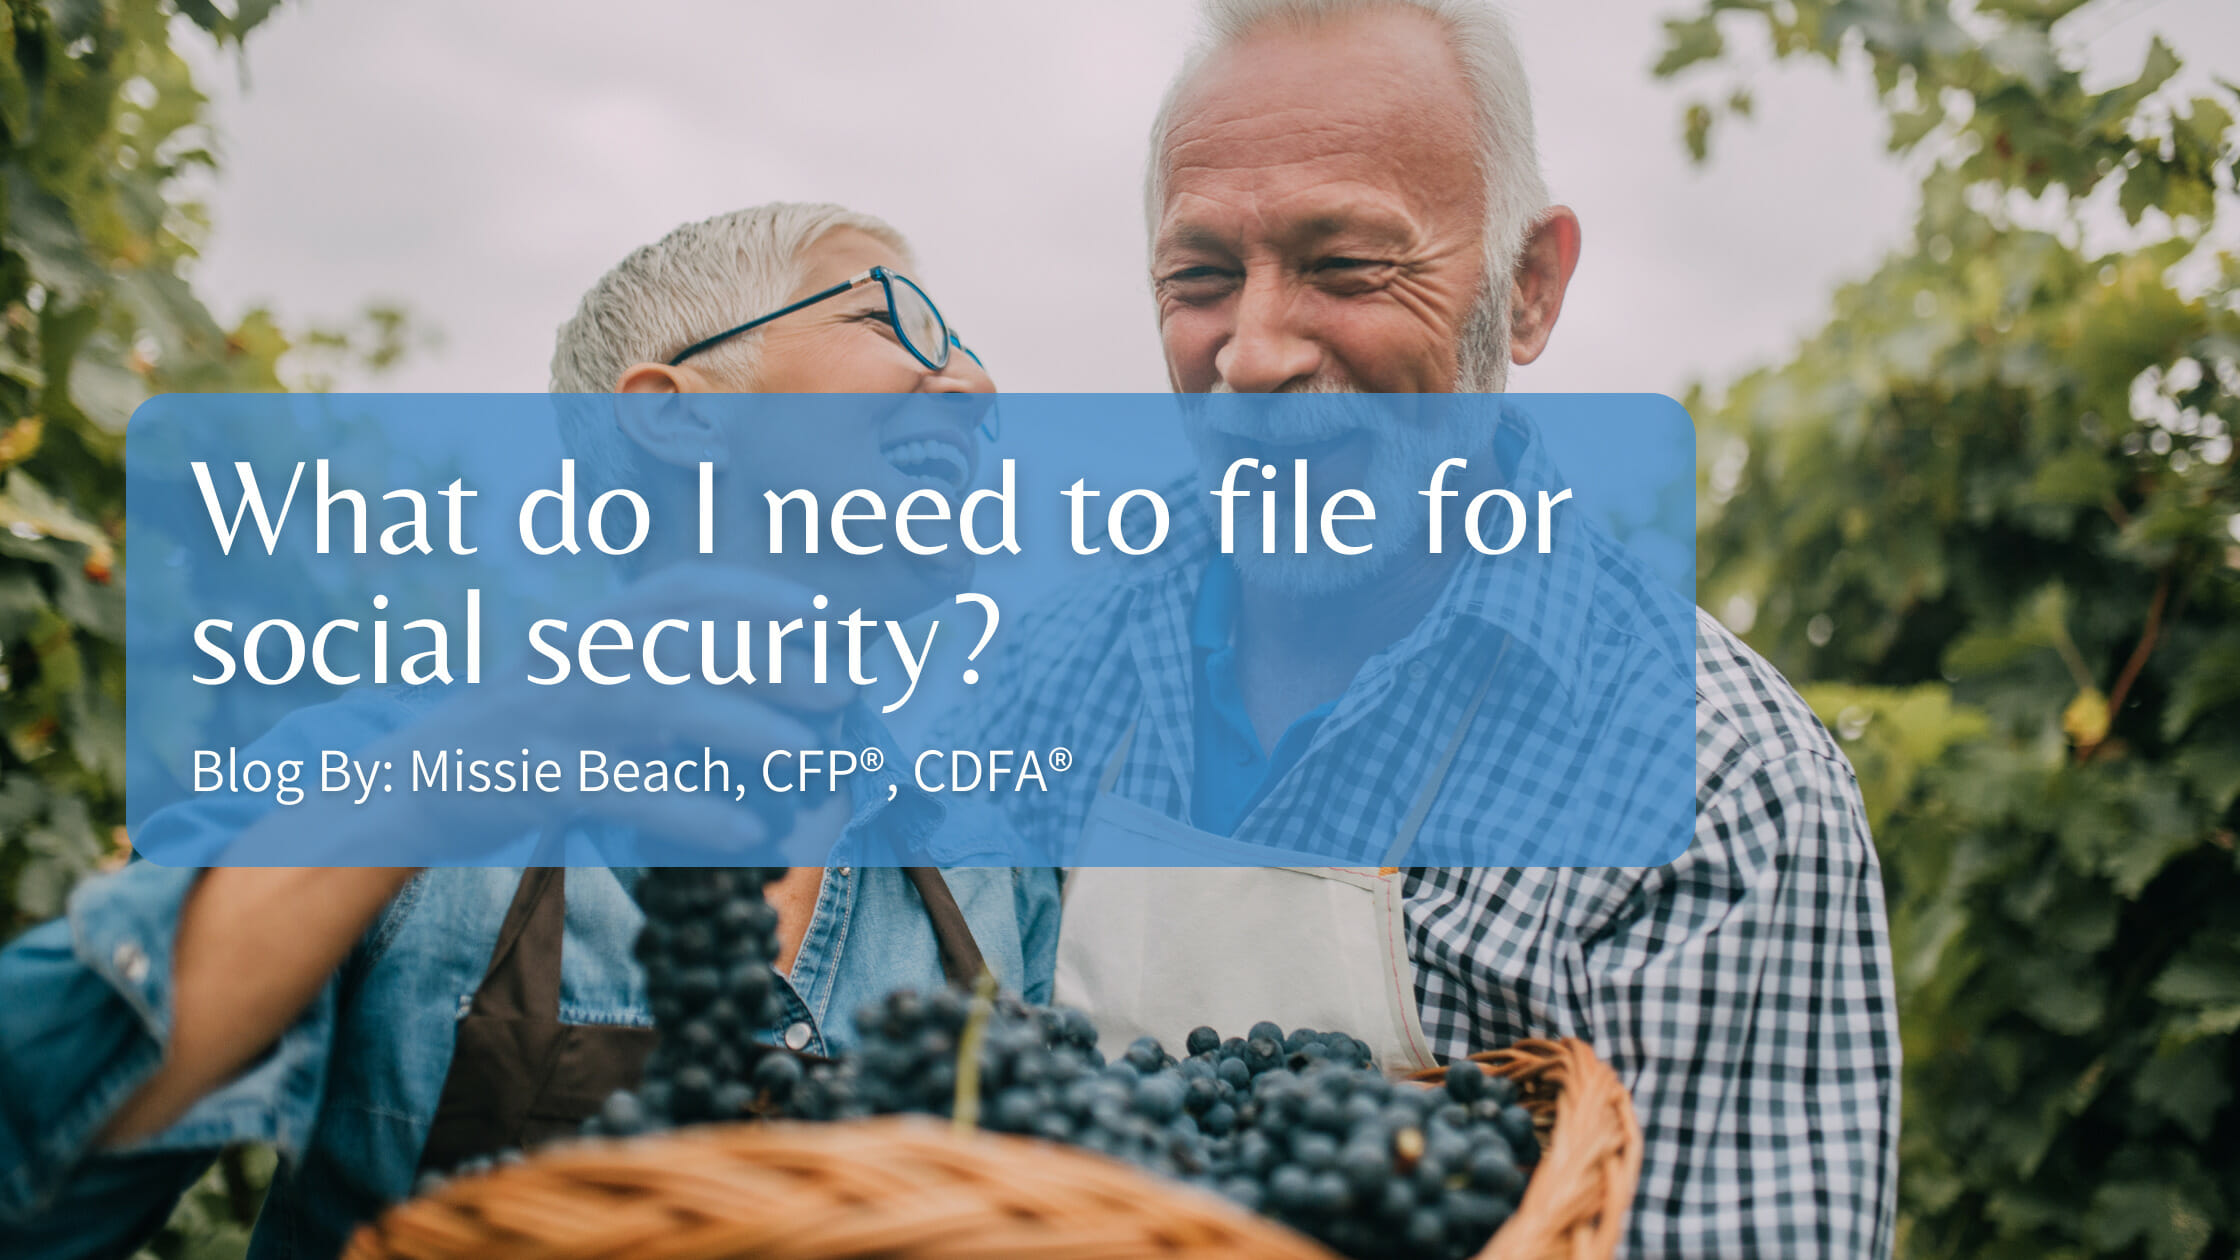 What Do I Need to File for Social Security?